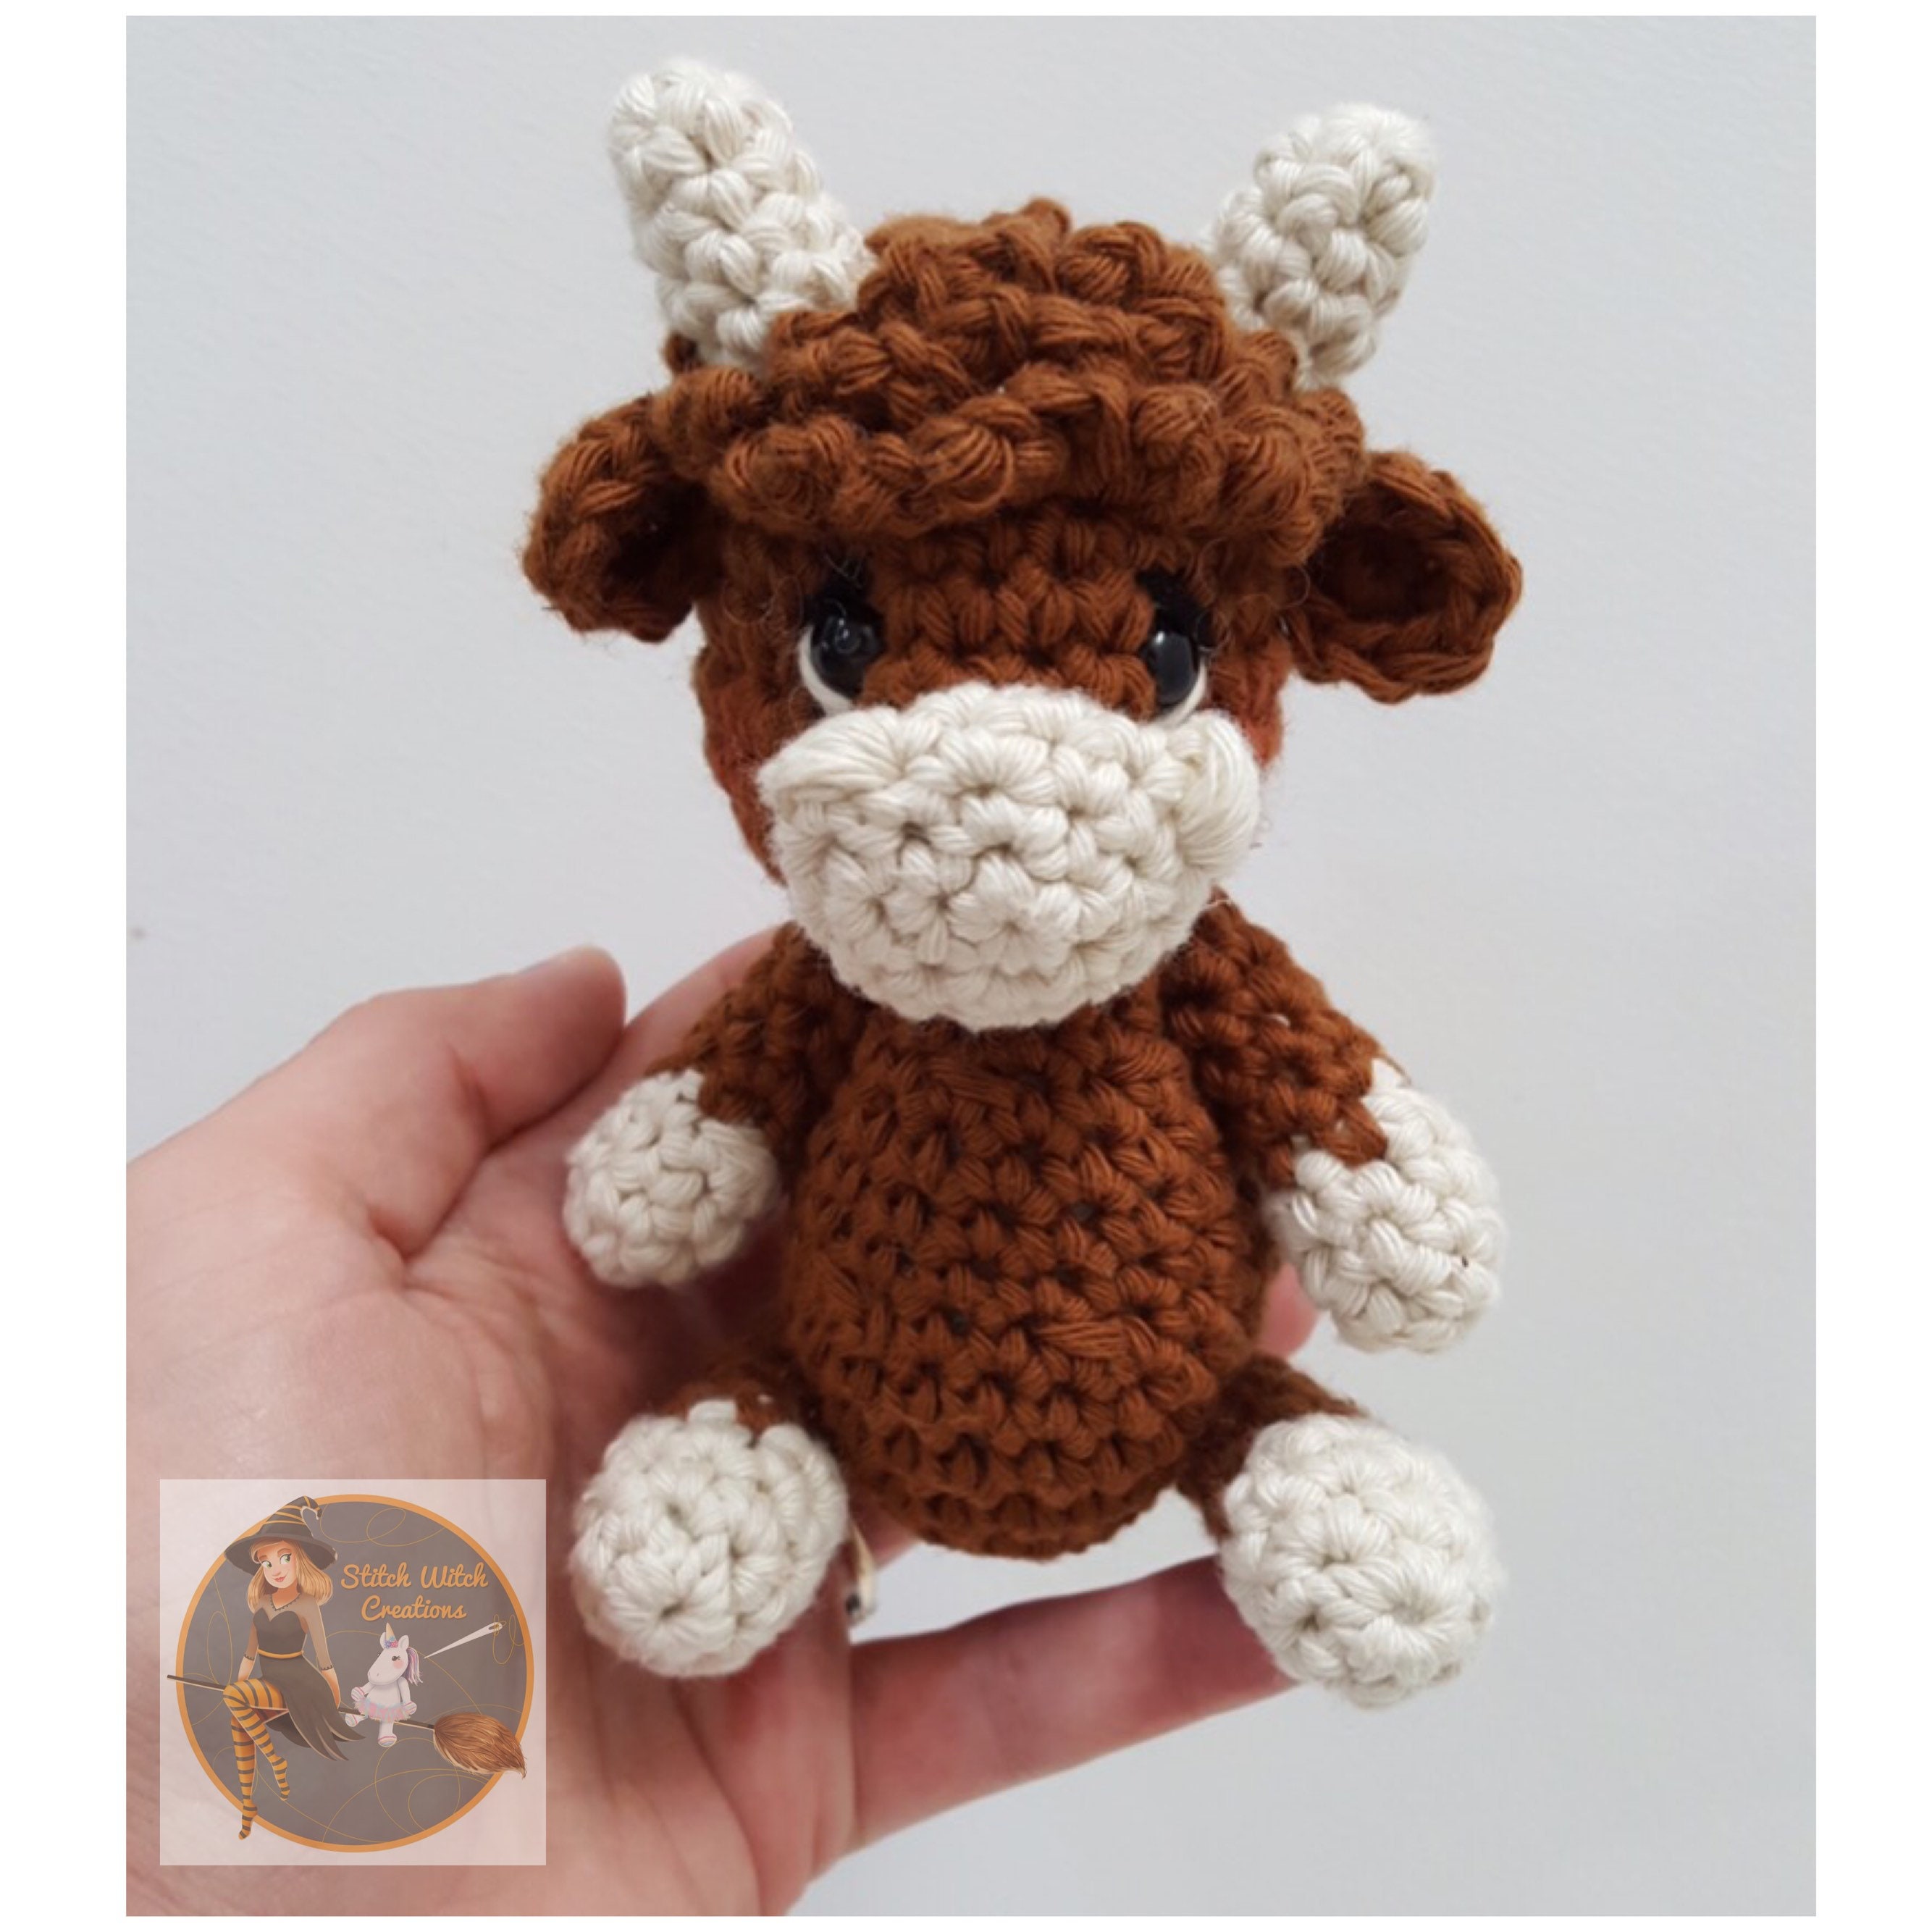 MINI Hart Highland Knotted Lovey Crochet Highland Cow PATTERN 